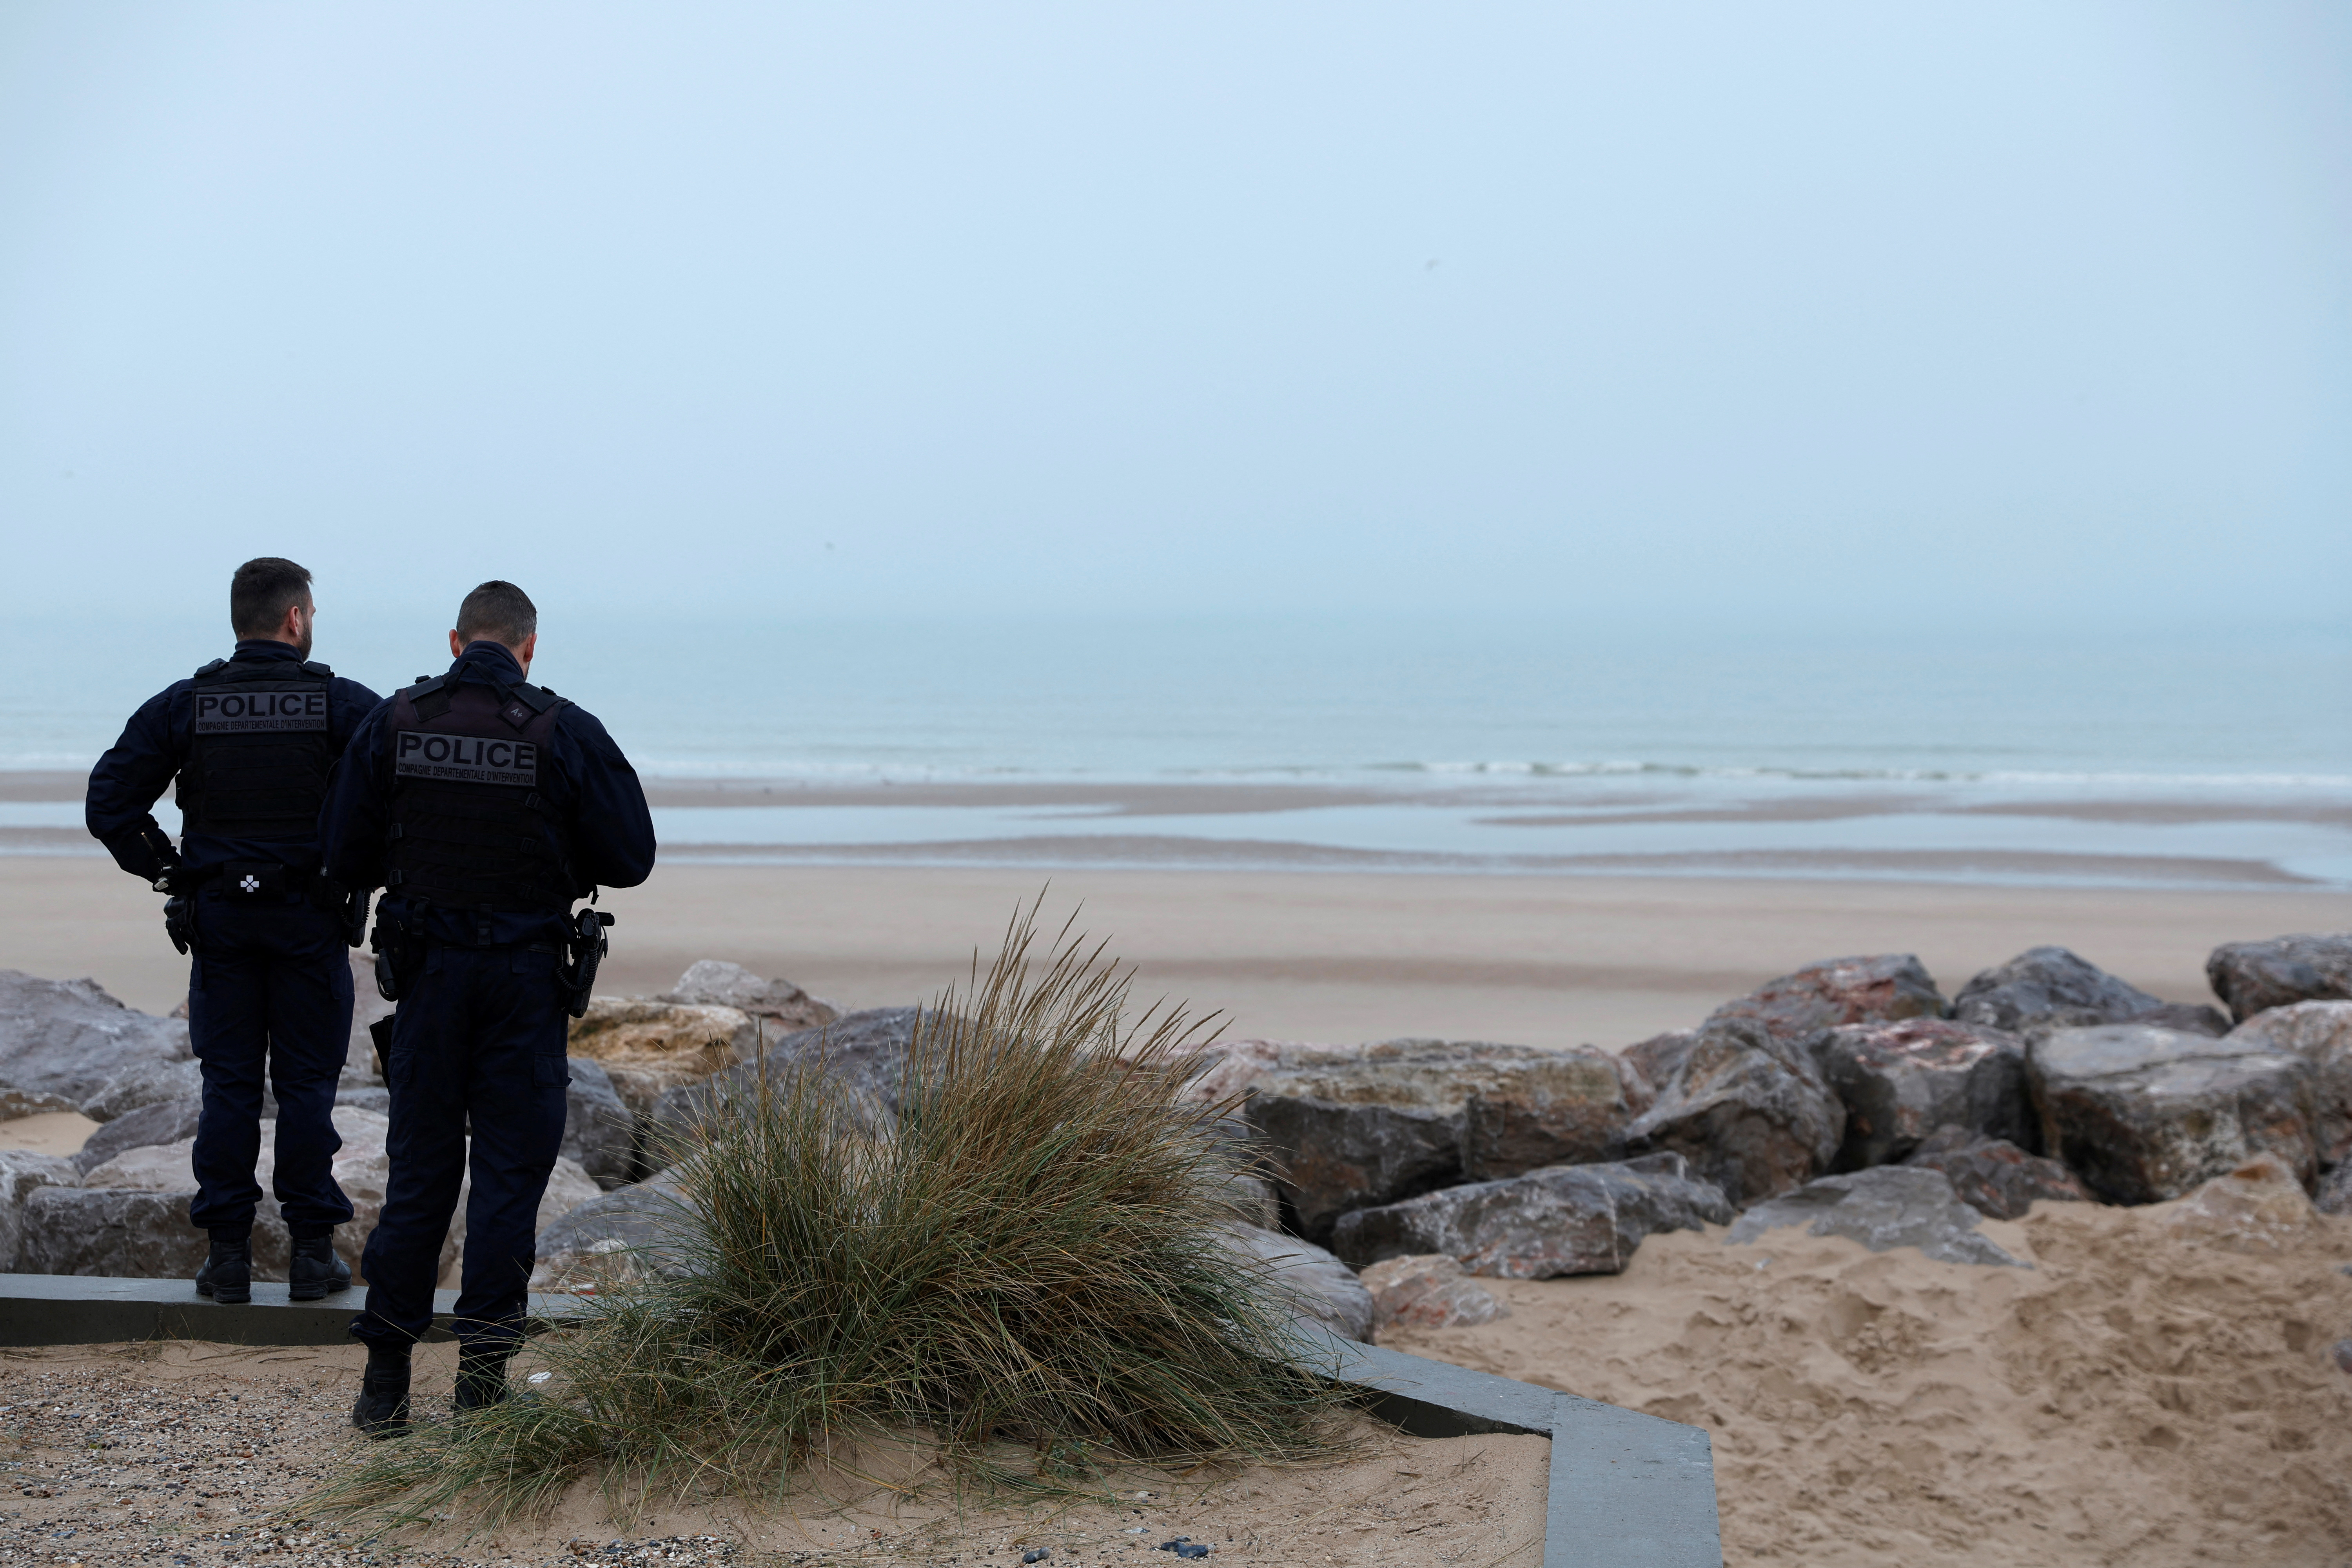 French police look at the coastline from a beach in Sangatte near Calais